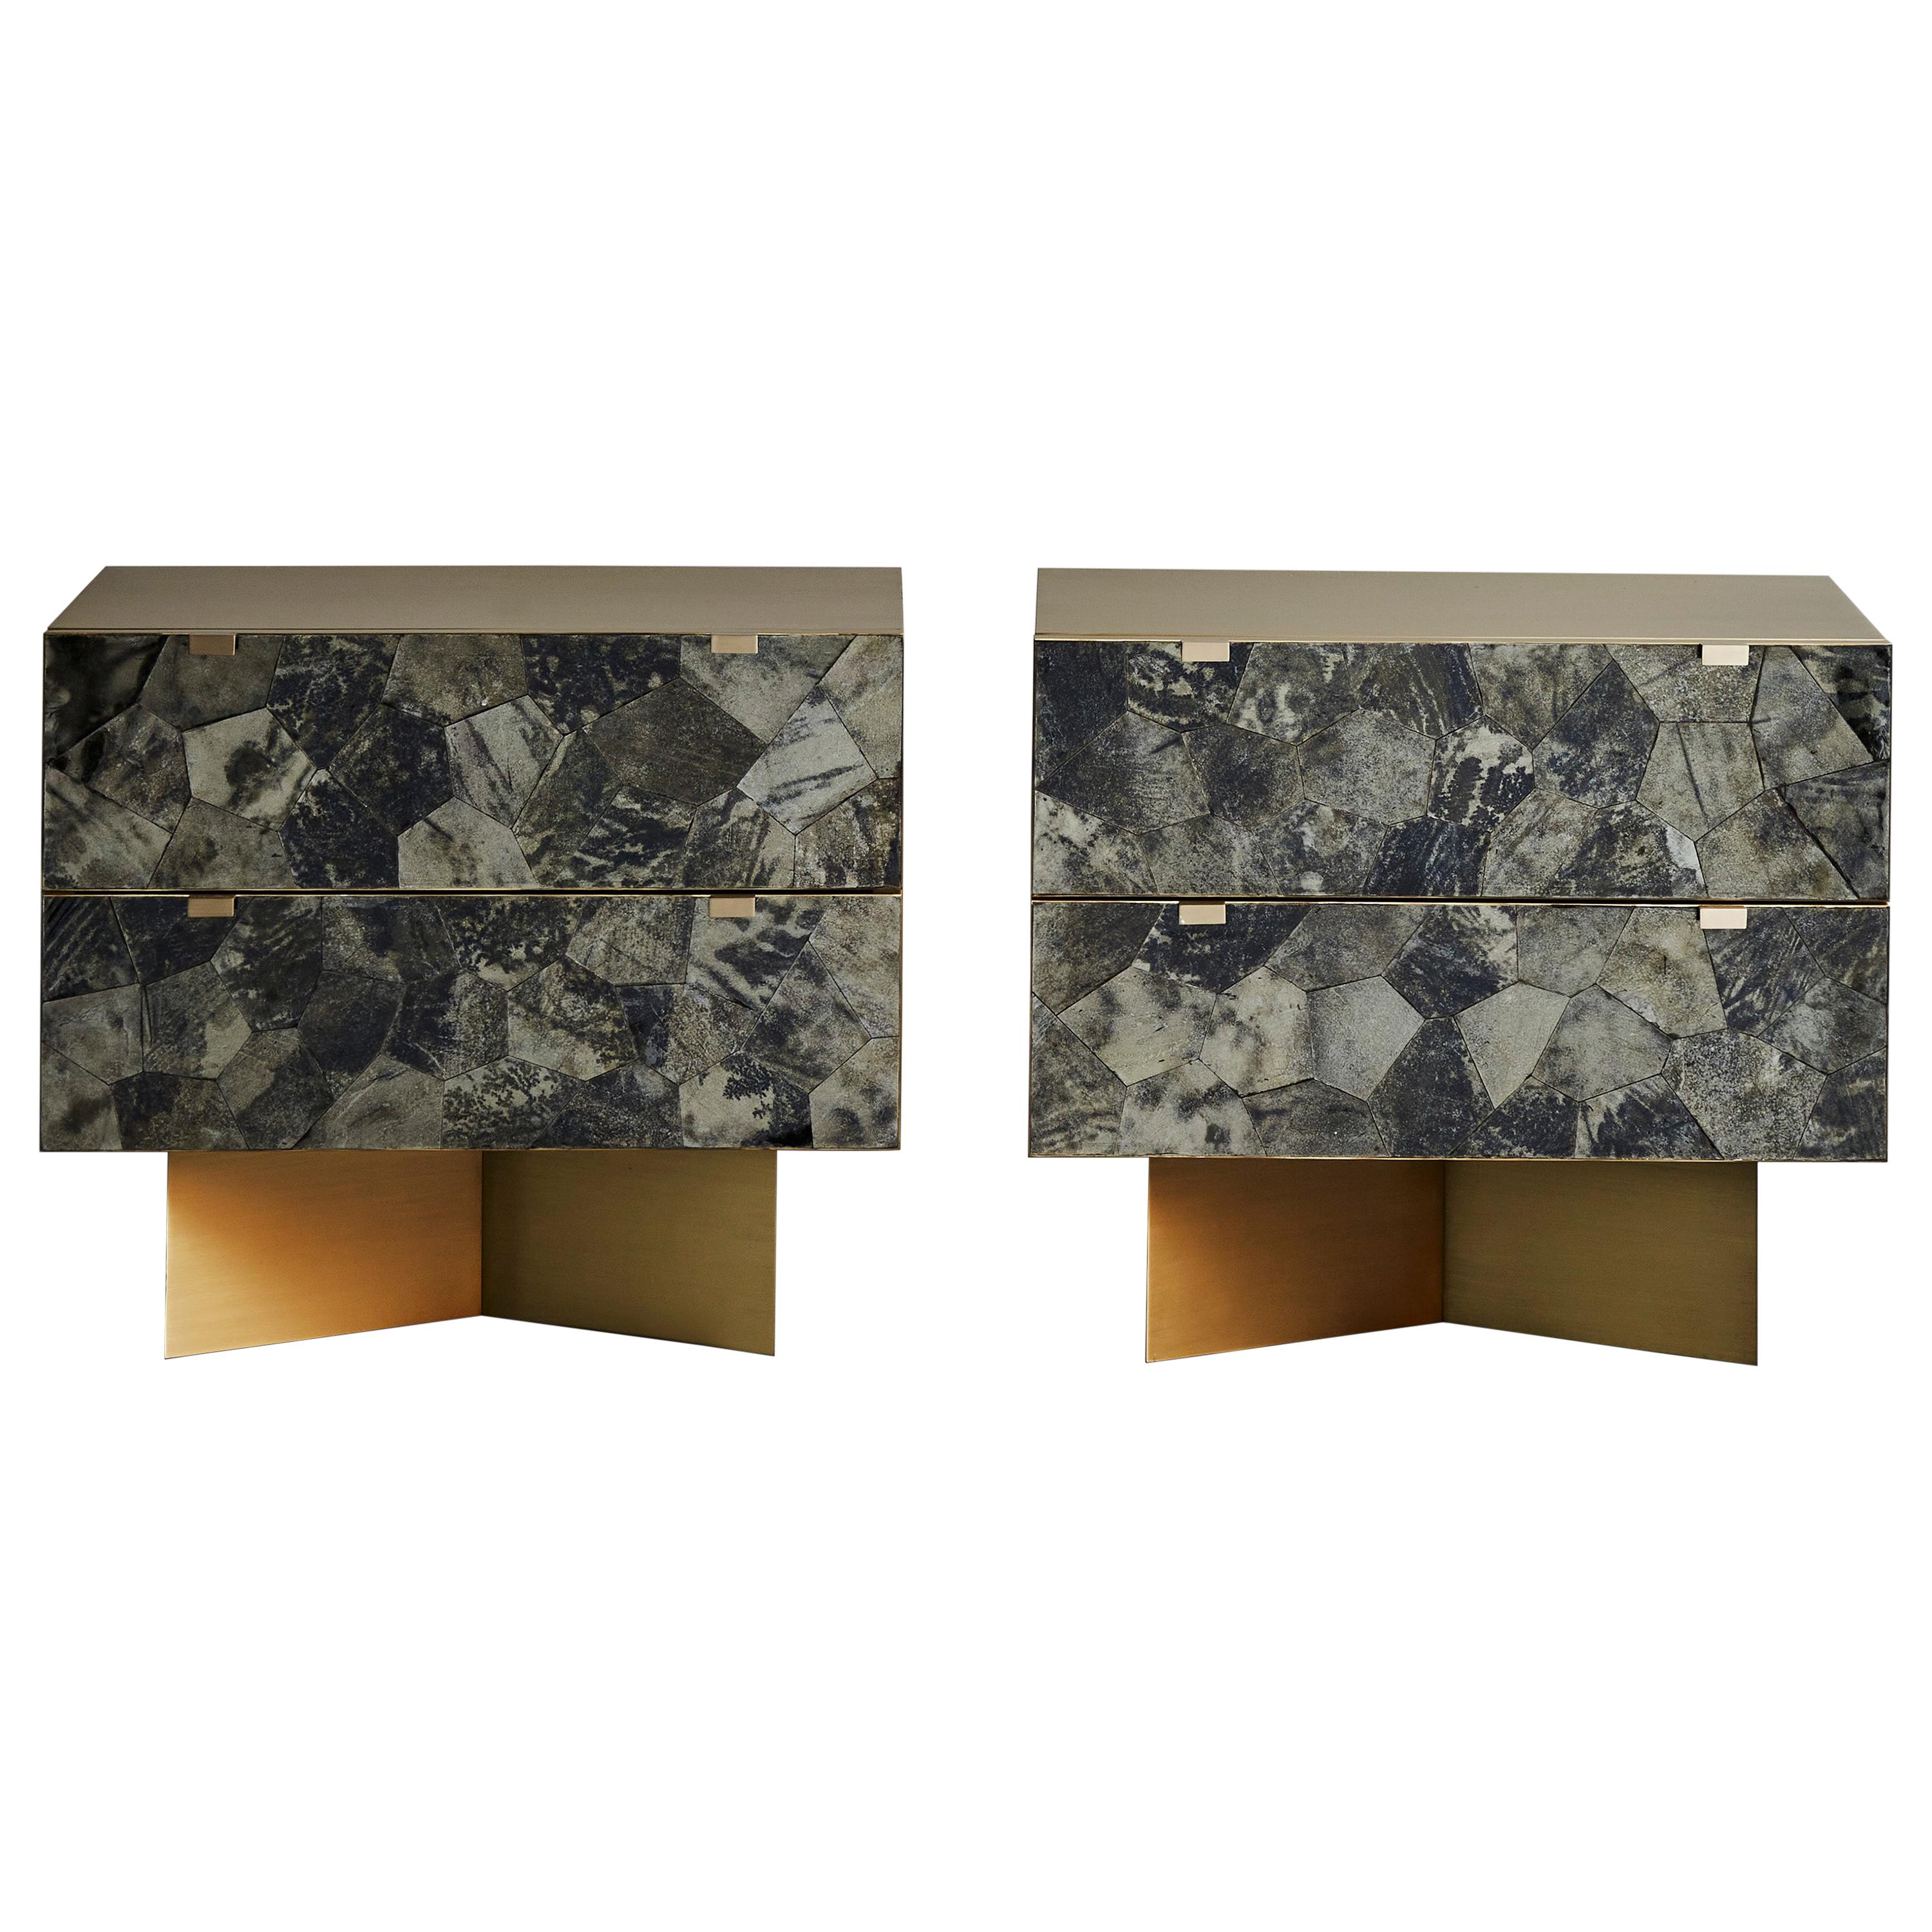 Pair of Mica Nightstands at Cost Price